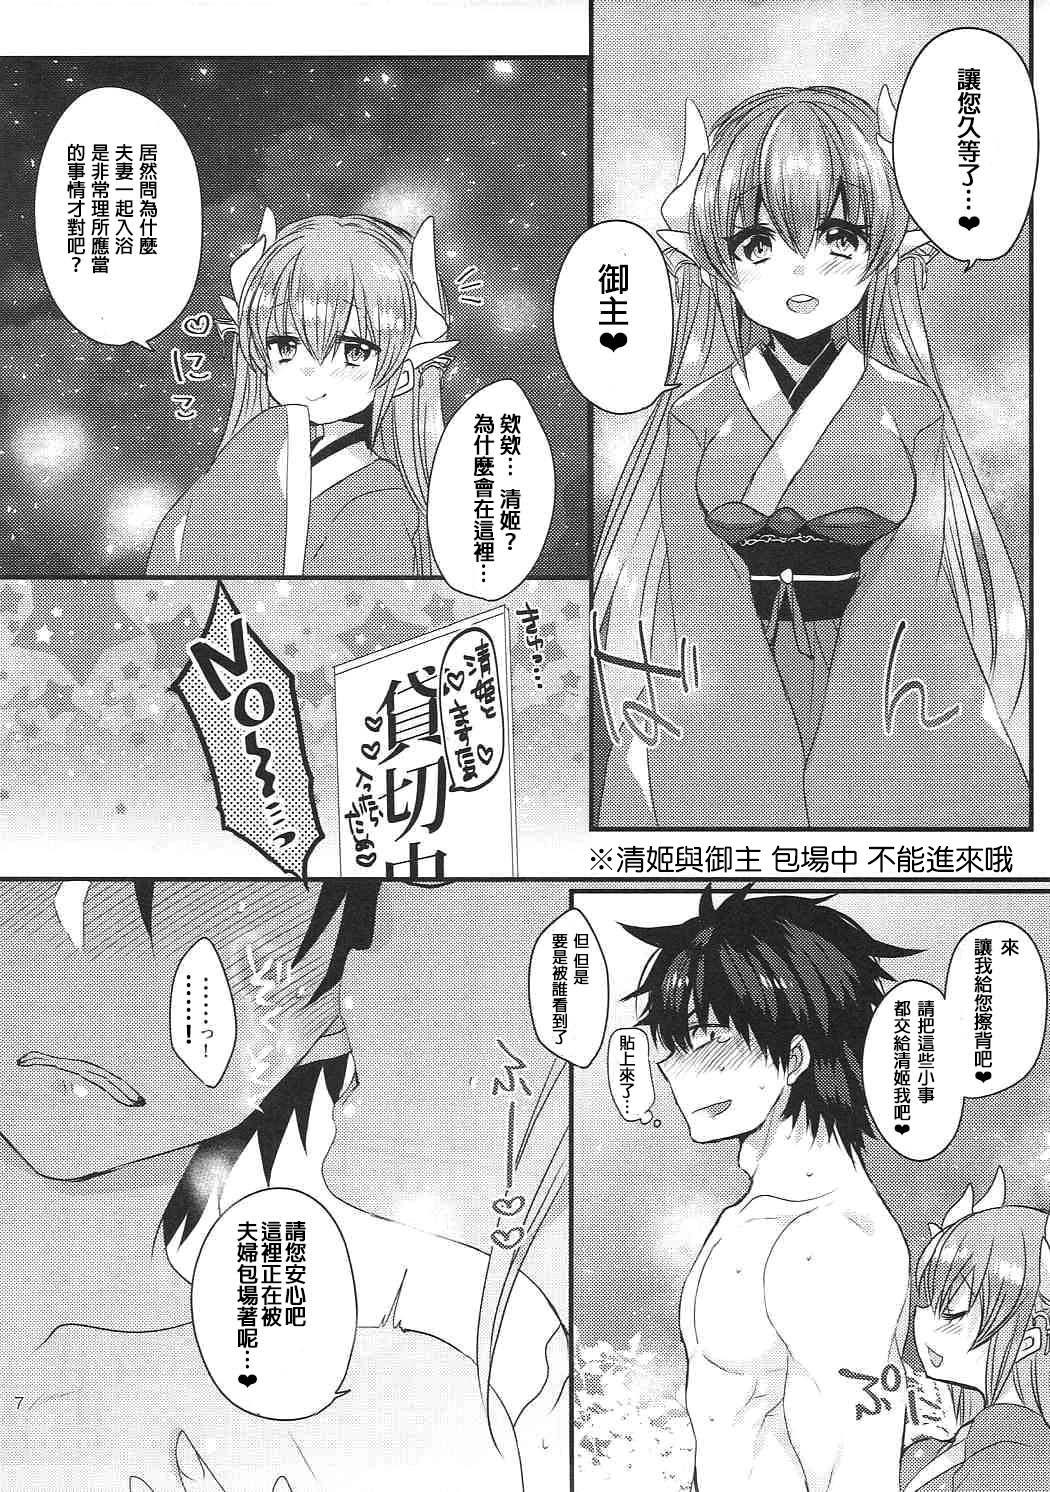 Blowjob Contest Kiyohime to Love Love Ofuro Time - Fate grand order Sloppy Blowjob - Page 7